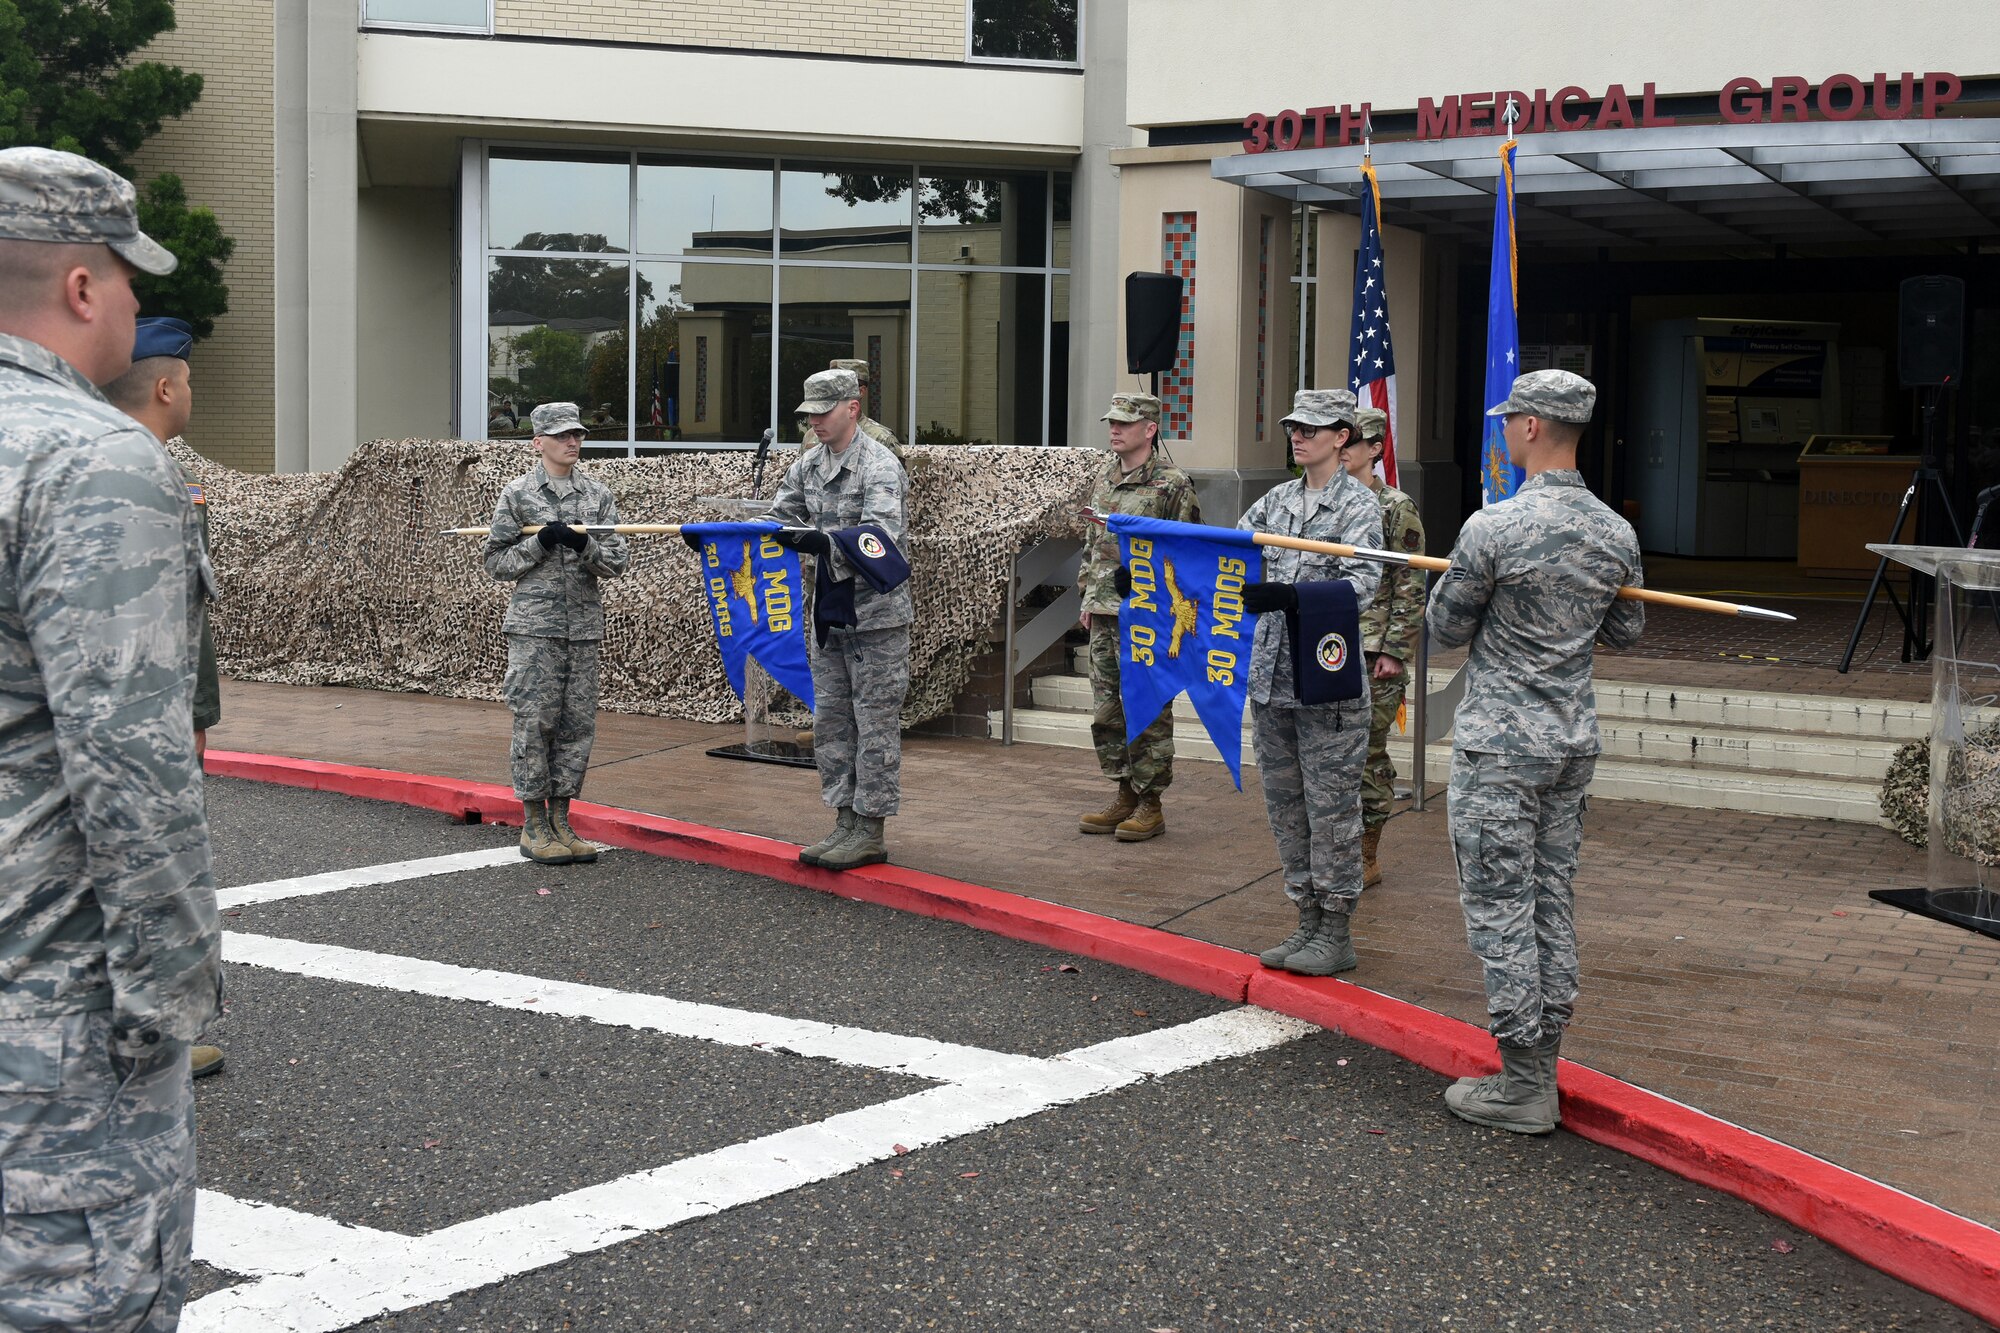 Vandenberg Color Guard team members simultaneously furl the guidon of the 30th Medical Operations Squadron and unfurl the guidon of the redesignated 30th Operational Medical Readiness Squadron during the 30th Medical Group reorganization ceremony Aug. 23, 2019, at Vandenberg Air Force Base, Calif.